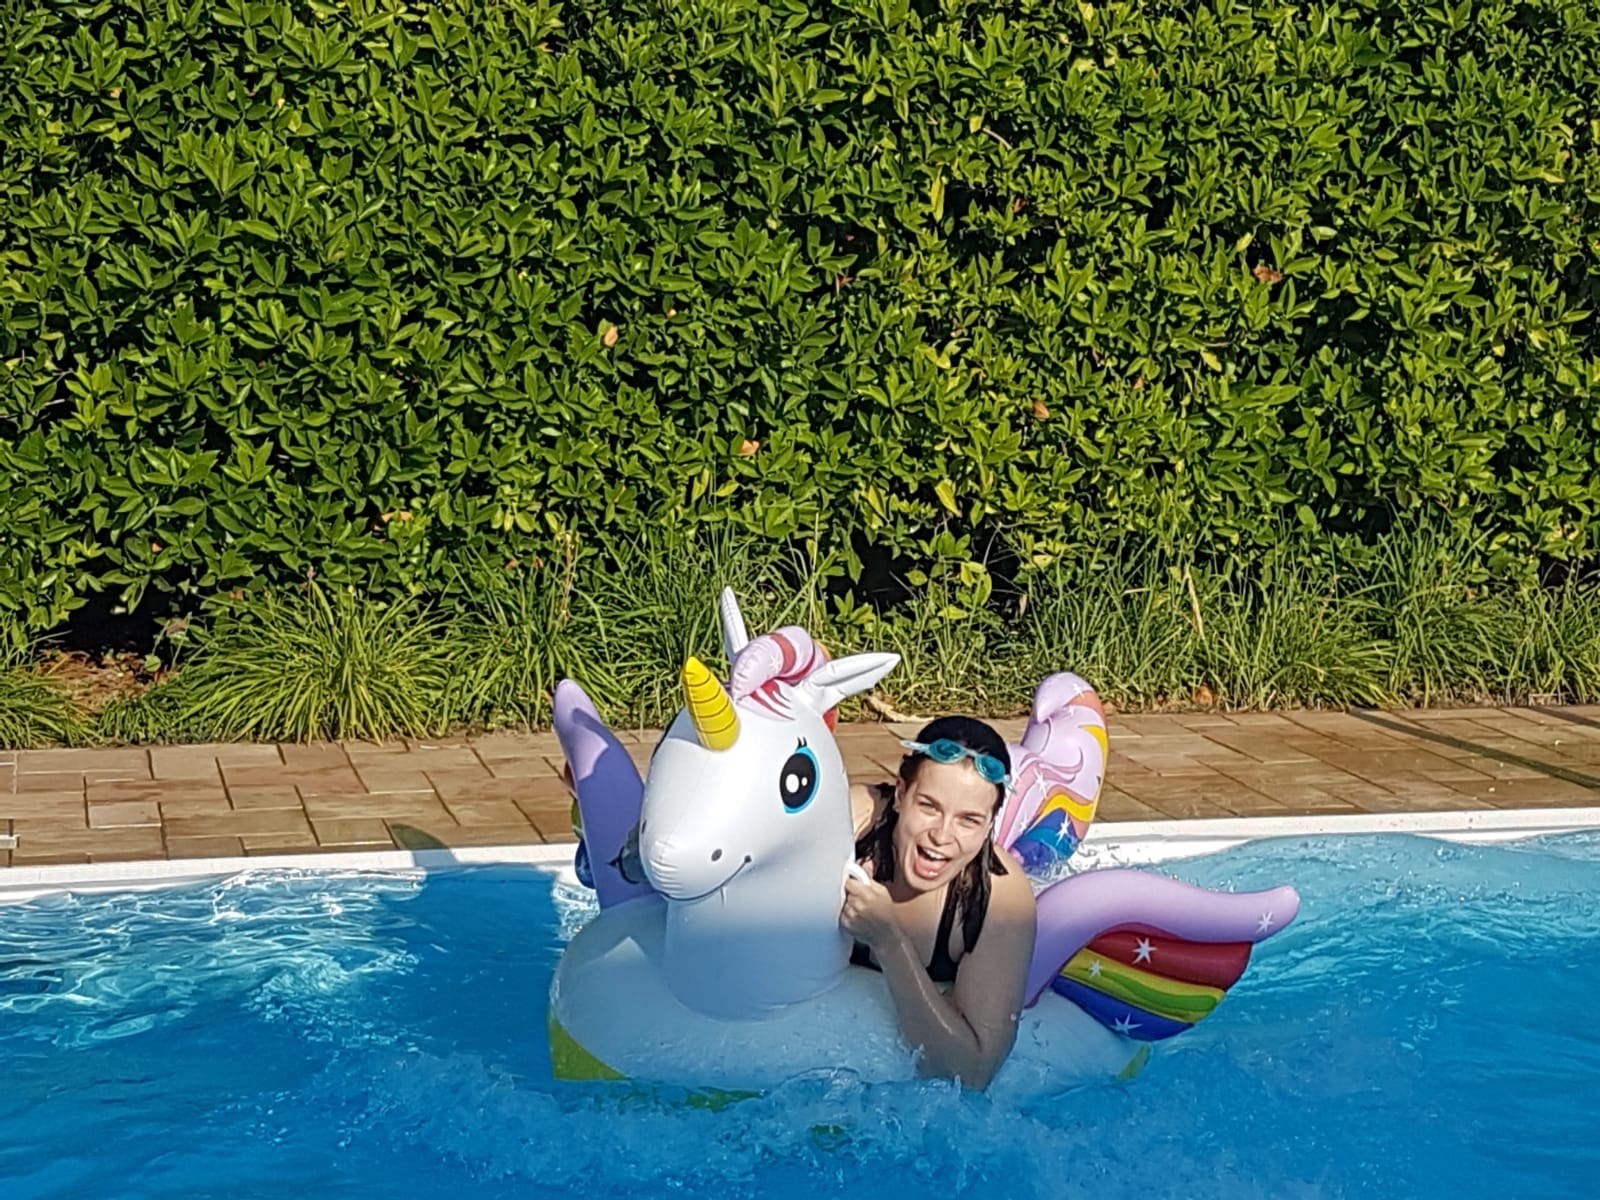 The author, a young woman, swims in a pool on a giant inflated winged unicorn floaty.